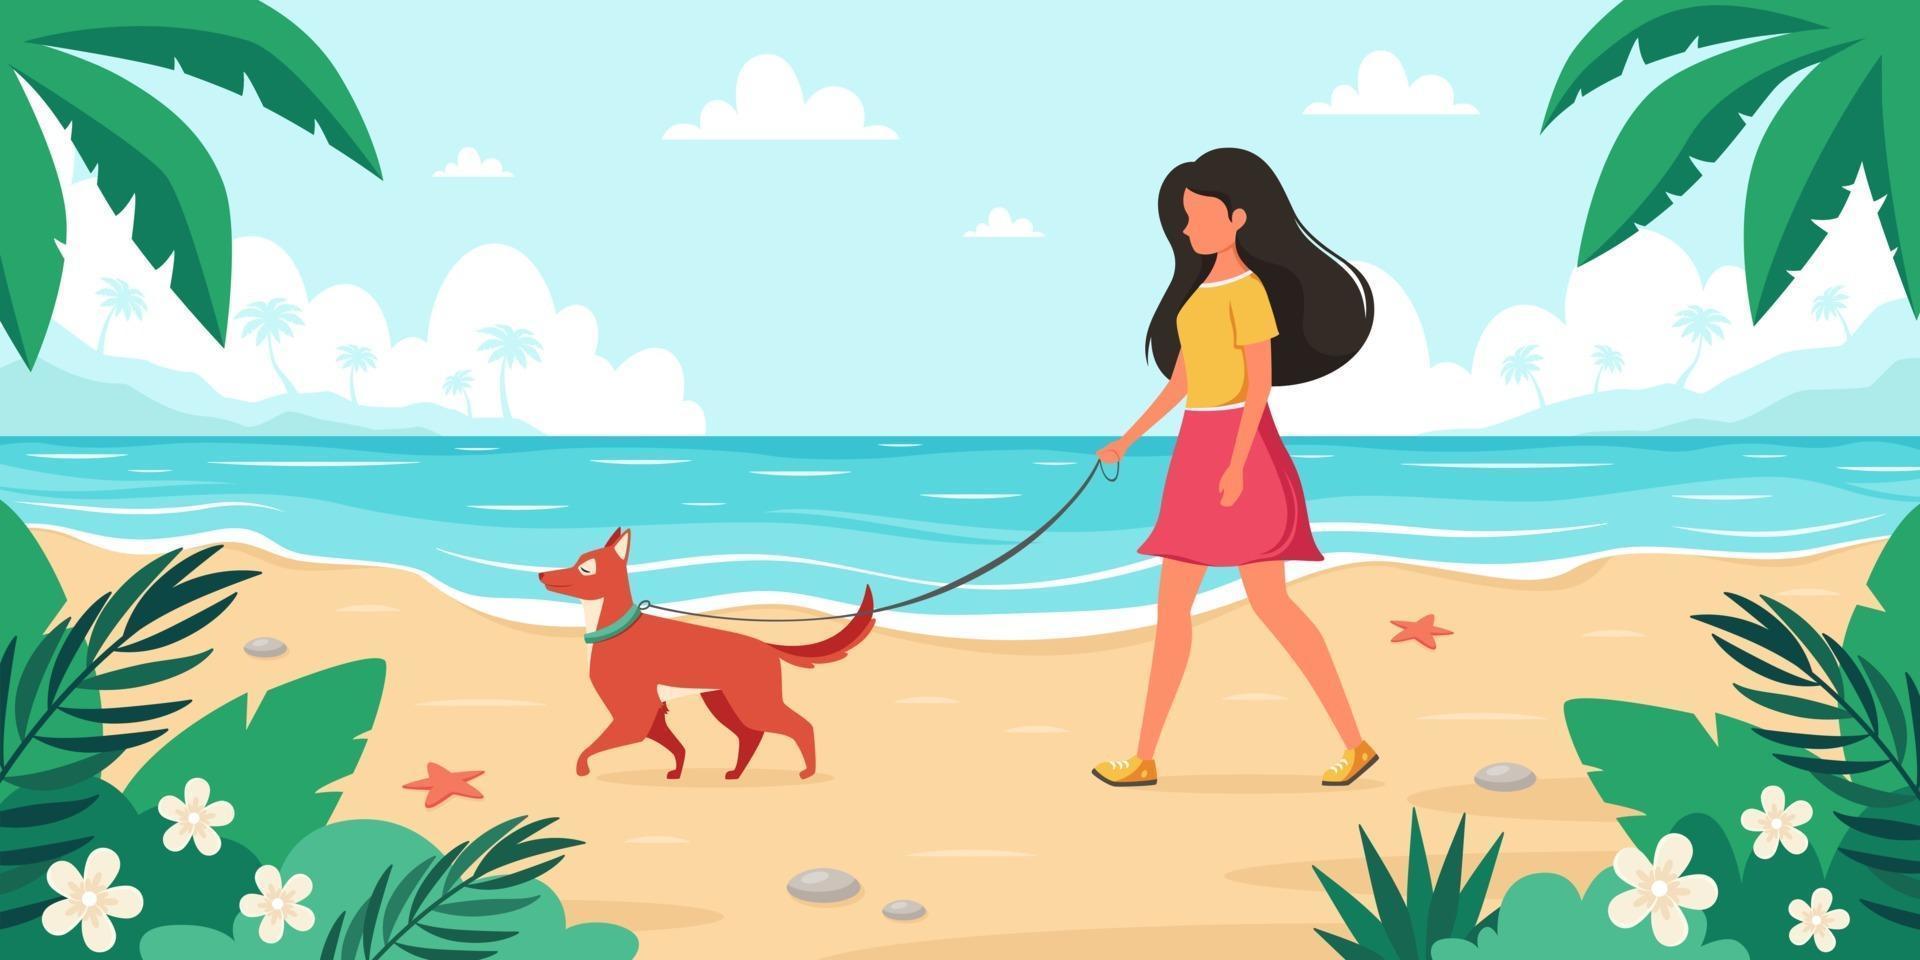 Leisure time on beach. Woman walking with dog. Summer time. Vector illustration